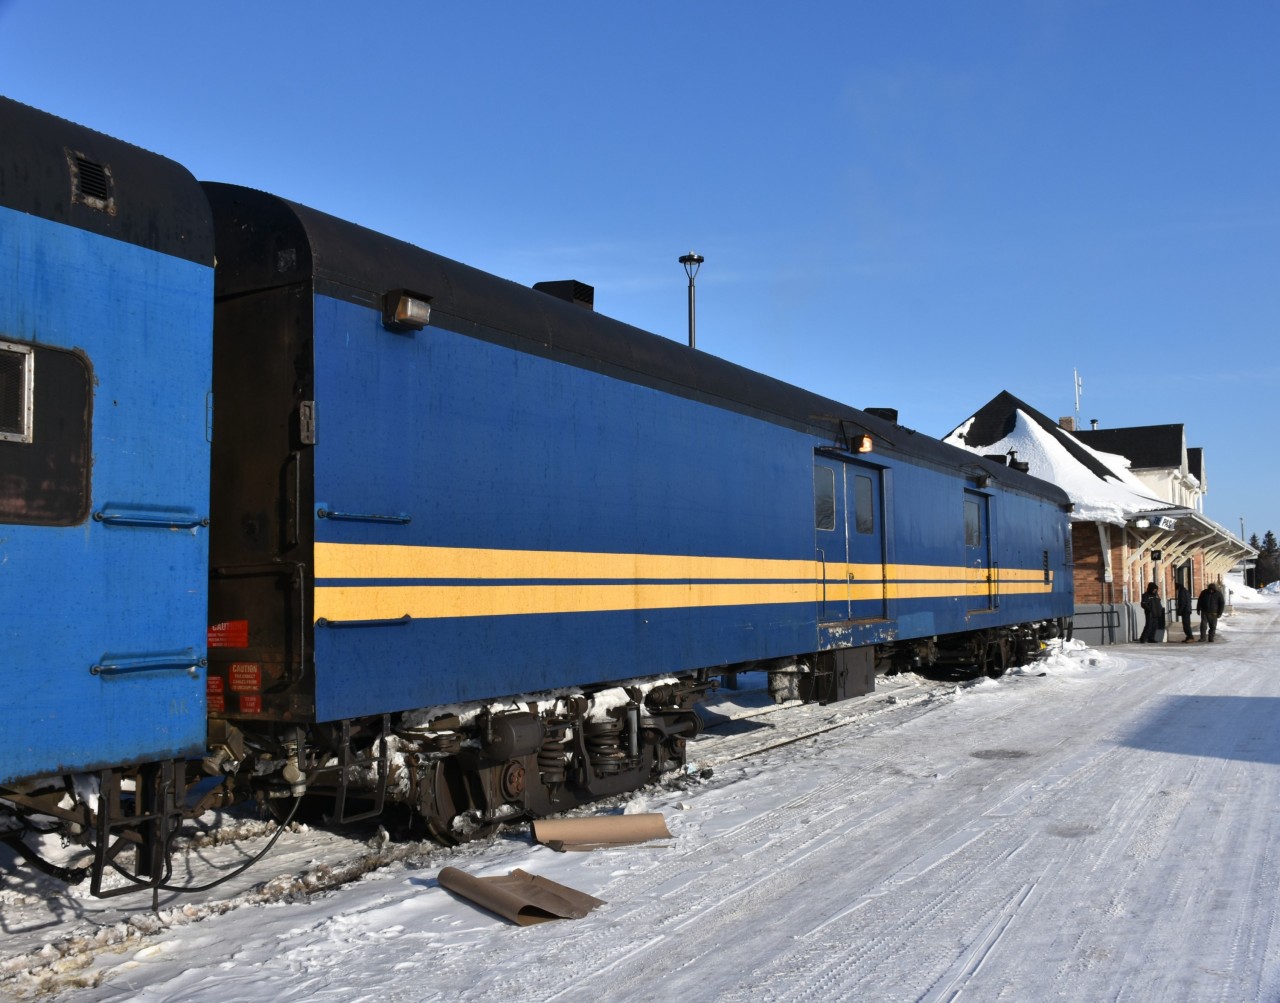 The last of the four ex-VIA/exx-CN passenger cars I photographed while in The Pas, MB this past March, and now lettered for Keewatin Railway Company is KRC 9631. 
KRC 9631 is (ex-VIA 9631, exx-CN 9631, nee-CN 9250), a Class BE-73-H, 73 foot 6 inch baggage car. It was built by NSC in 1955. 
This car houses two diesel driven generators (one running, one backup), a large furnace for keeping the baggage compartment warm during the brutally cold winter months, and a large open area for carrying baggage, supplies, and other items for the long journey of the Pukatawagan Mixed. 
Having access all around the exterior of the cars where they were stored, and then a full tour on board once the 'Mixed' was made up was an experience I will long remember. The KRC train crew and local supervisor where a great bunch of guys and welcomed all my requests for information and photo opportunities. :-)